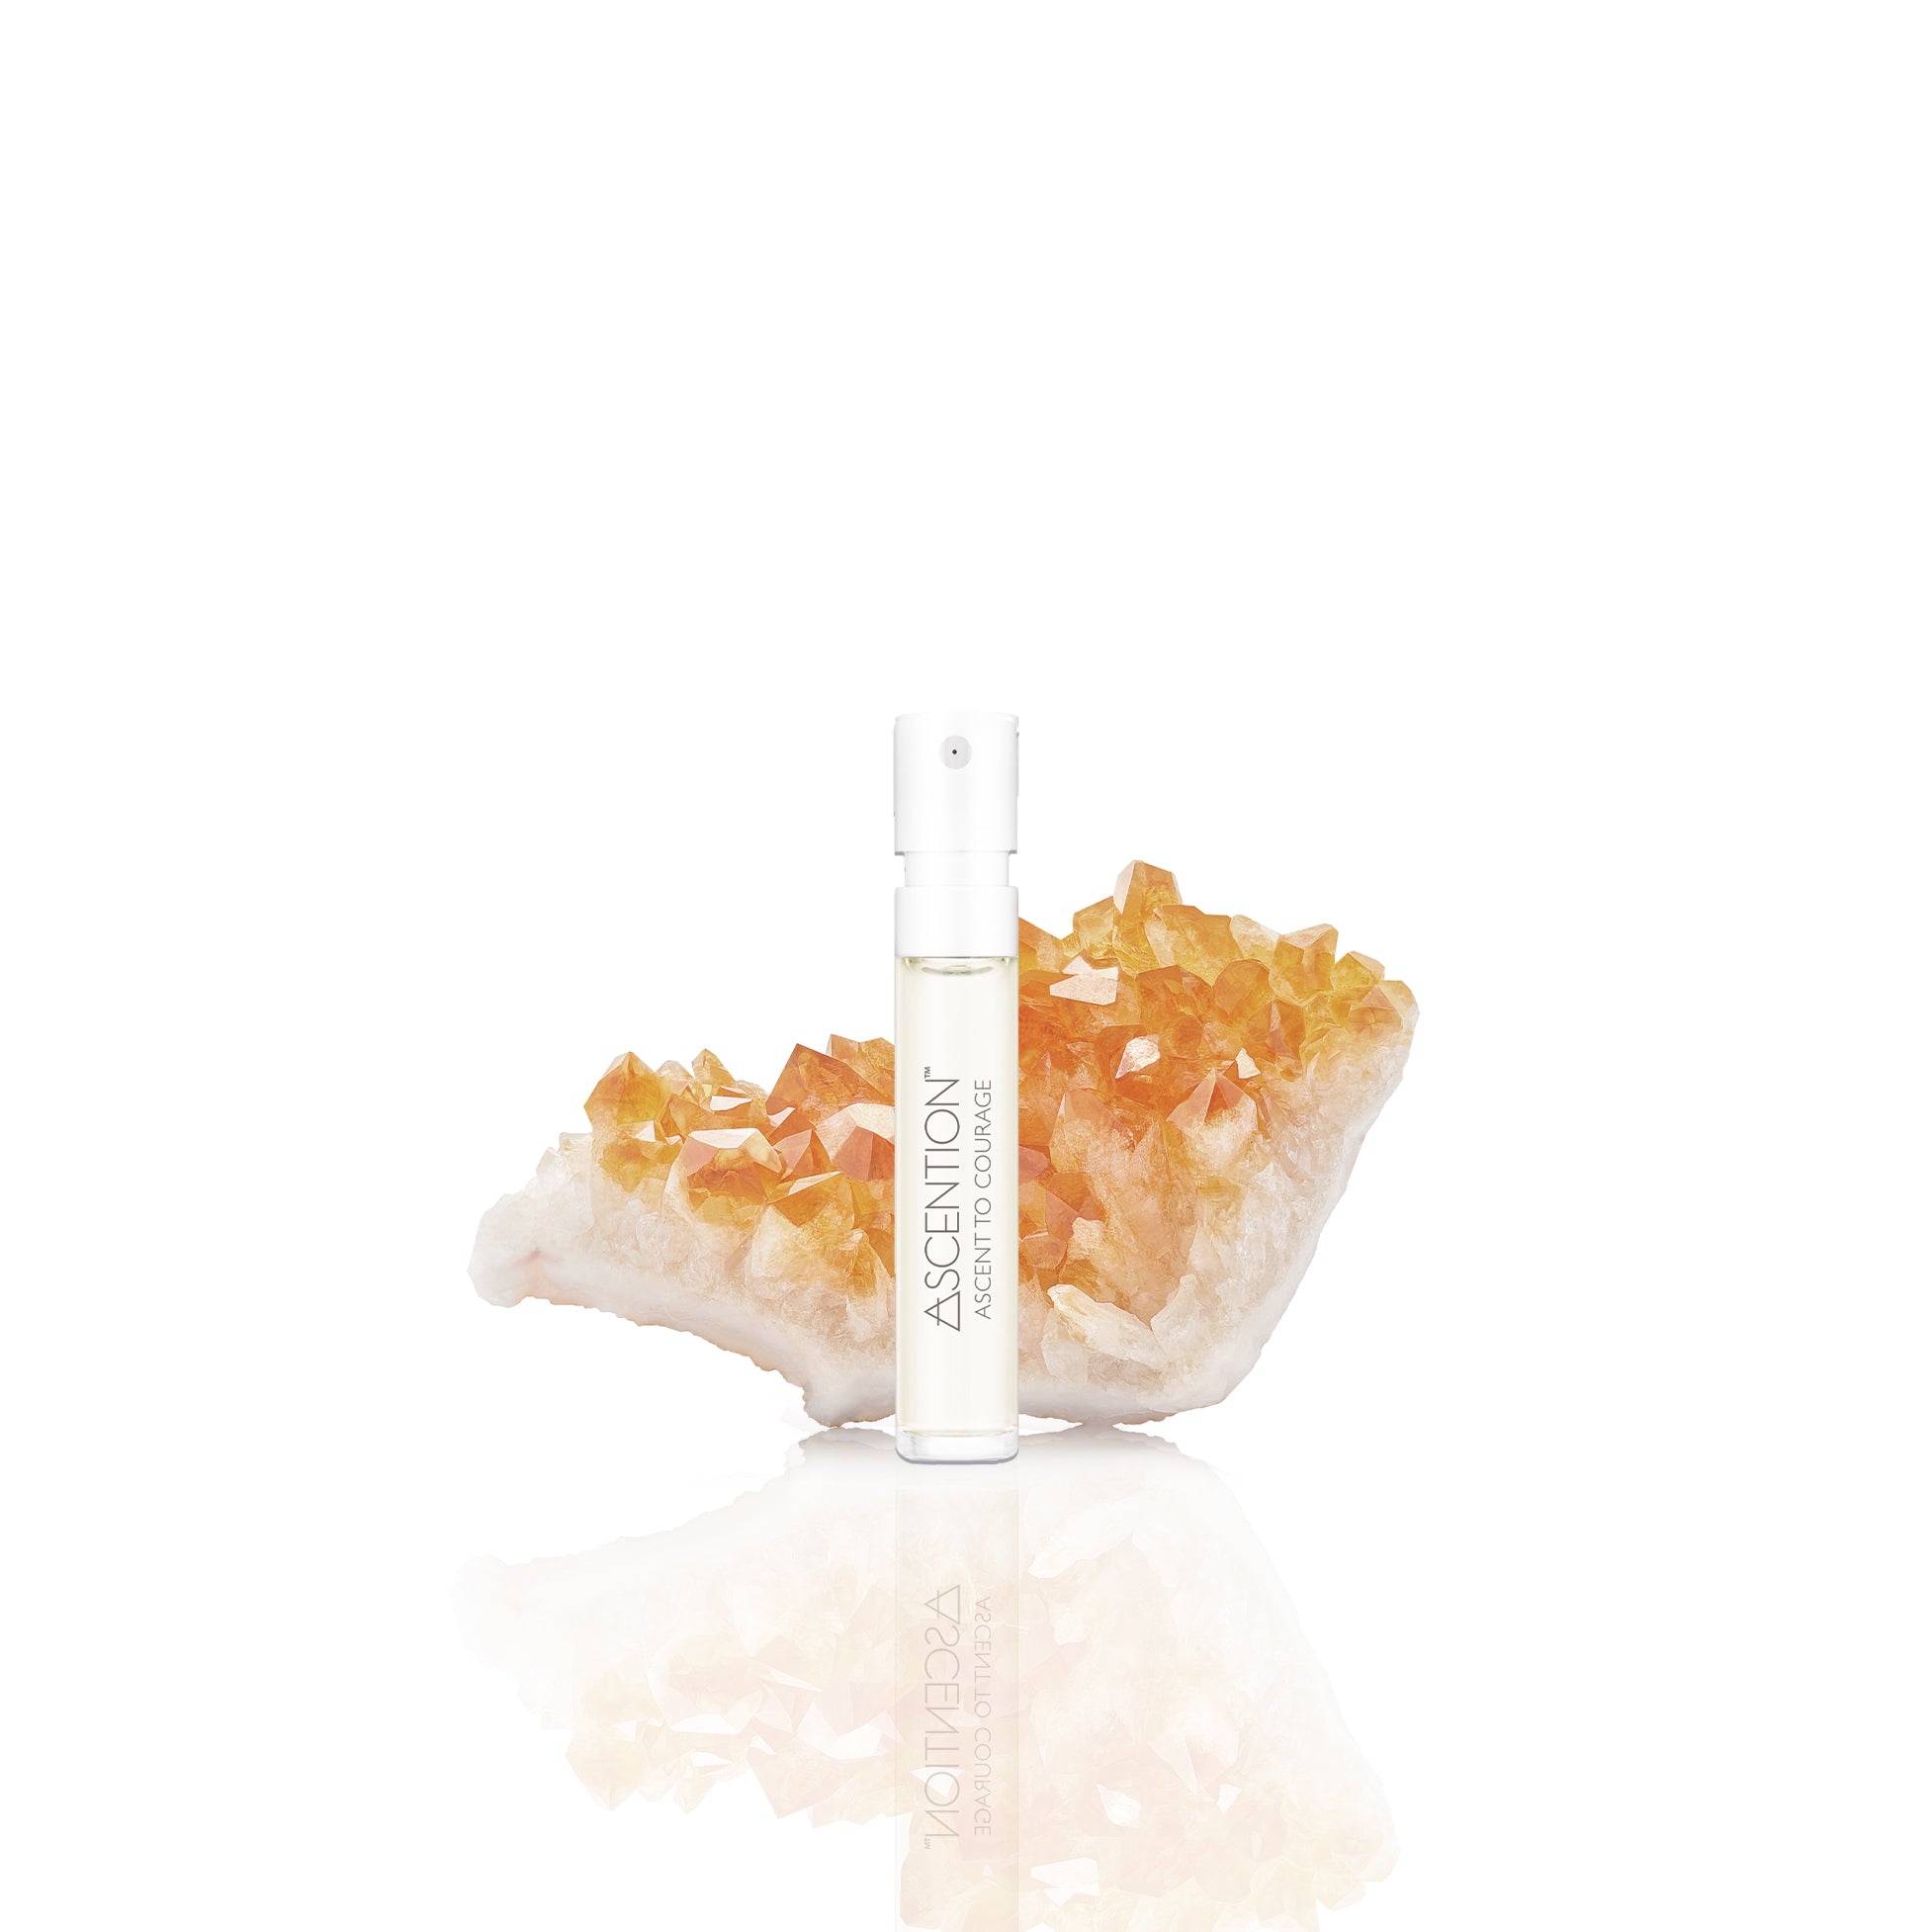 Ascent to Courage with Citrine crystal, scent with intent samples, don't just smell good, feel good. Discover, experience and manifest with scent resonates with you. Ascention is elevating the clean fragrance experience into wellness.